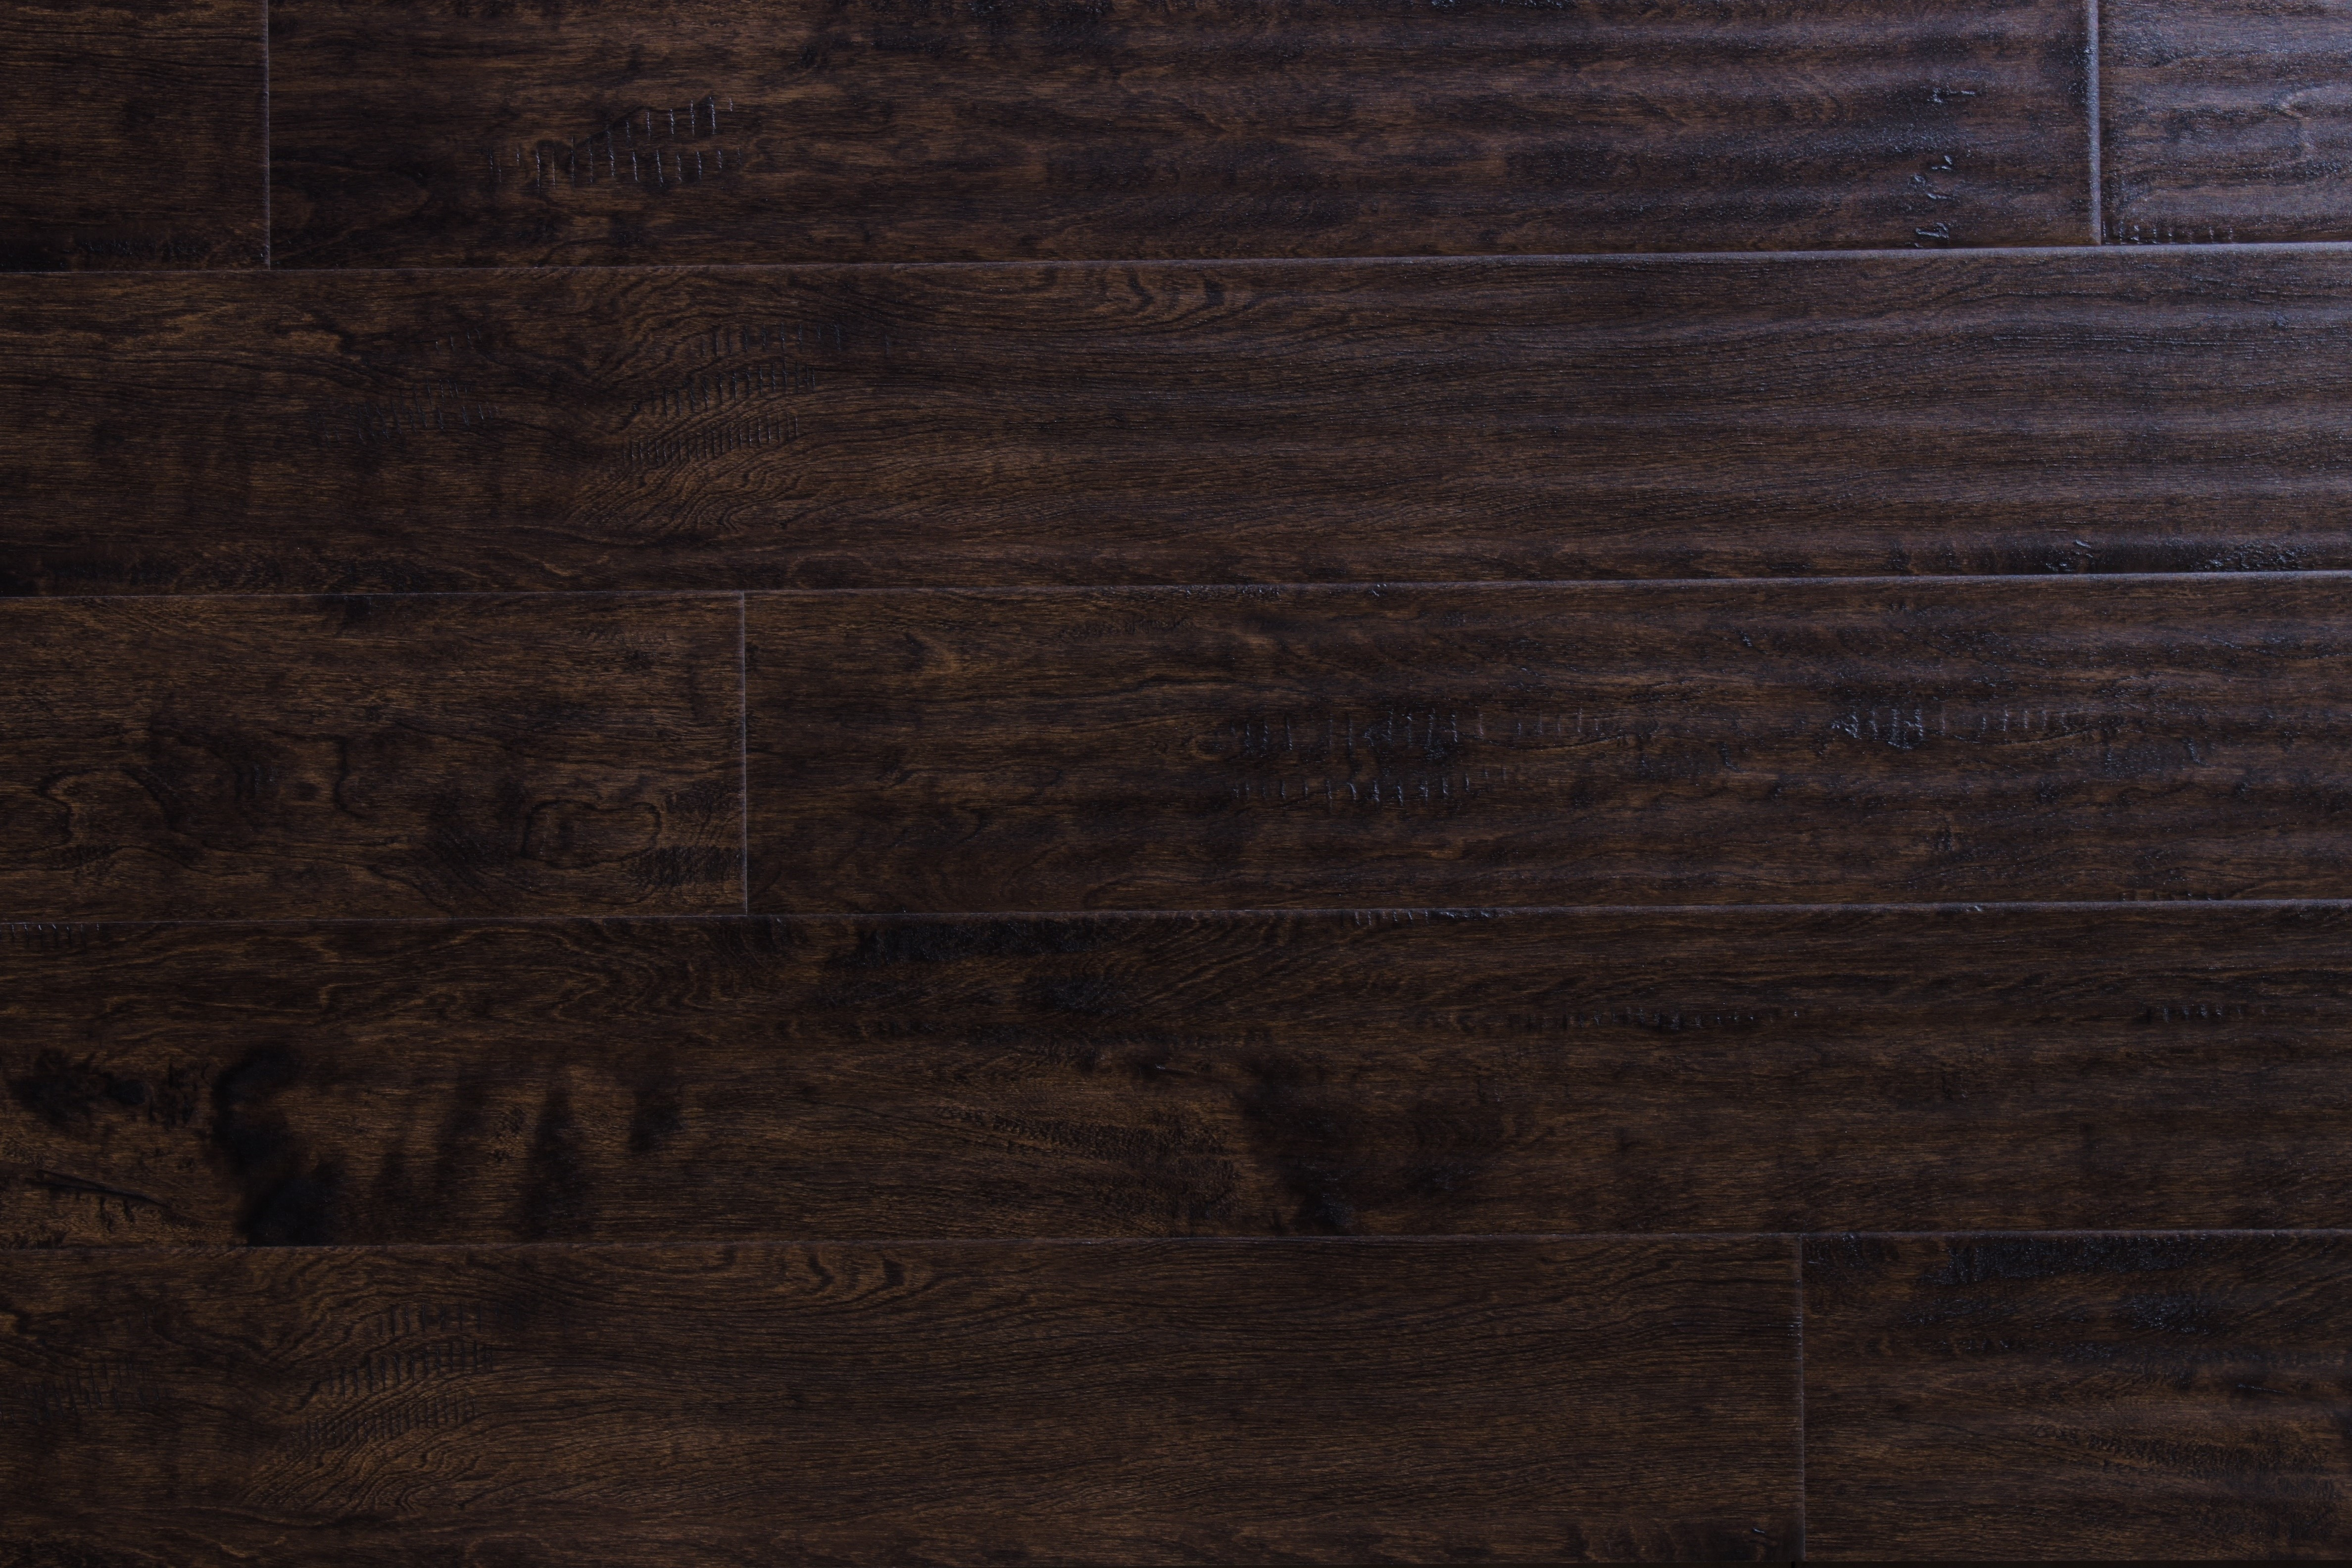 16 Stylish Hardwood Flooring Suppliers Denver Co 2024 free download hardwood flooring suppliers denver co of wood flooring free samples available at builddirecta for tailor multi gb 5874277bb8d3c